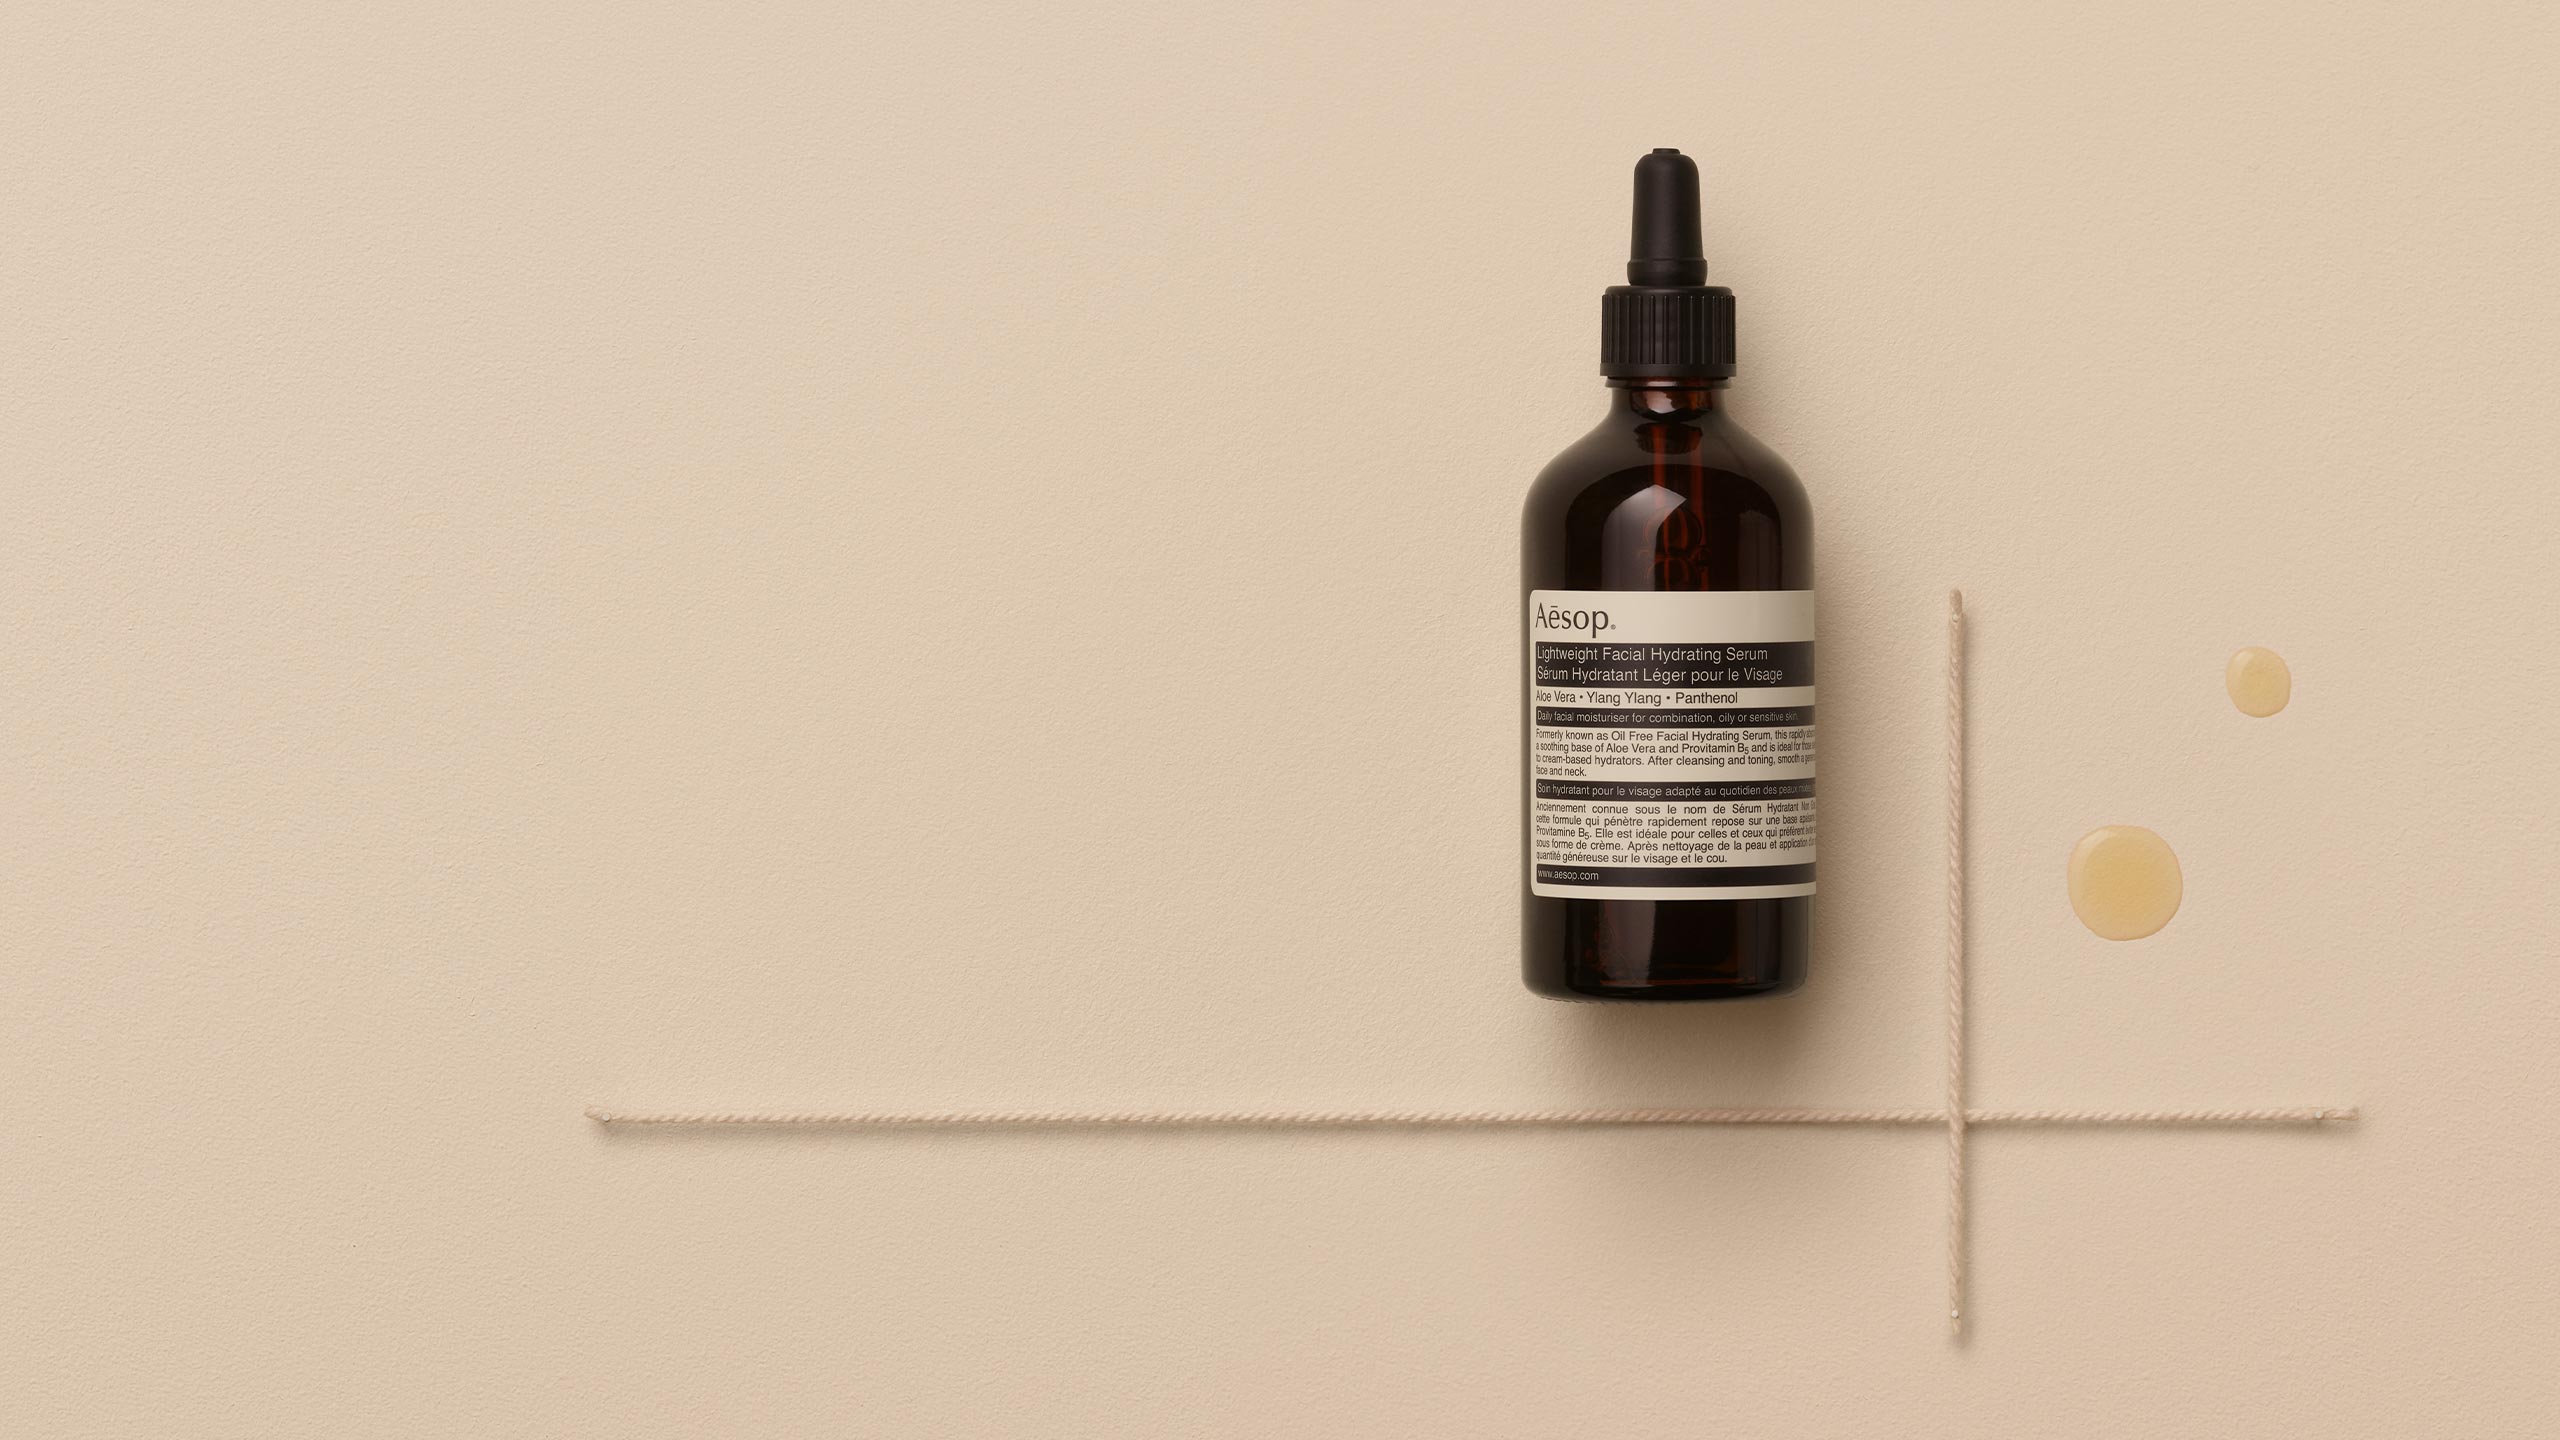 Aesop lightweight facial hydrating serum and two drops of the serum placed on textured beige background